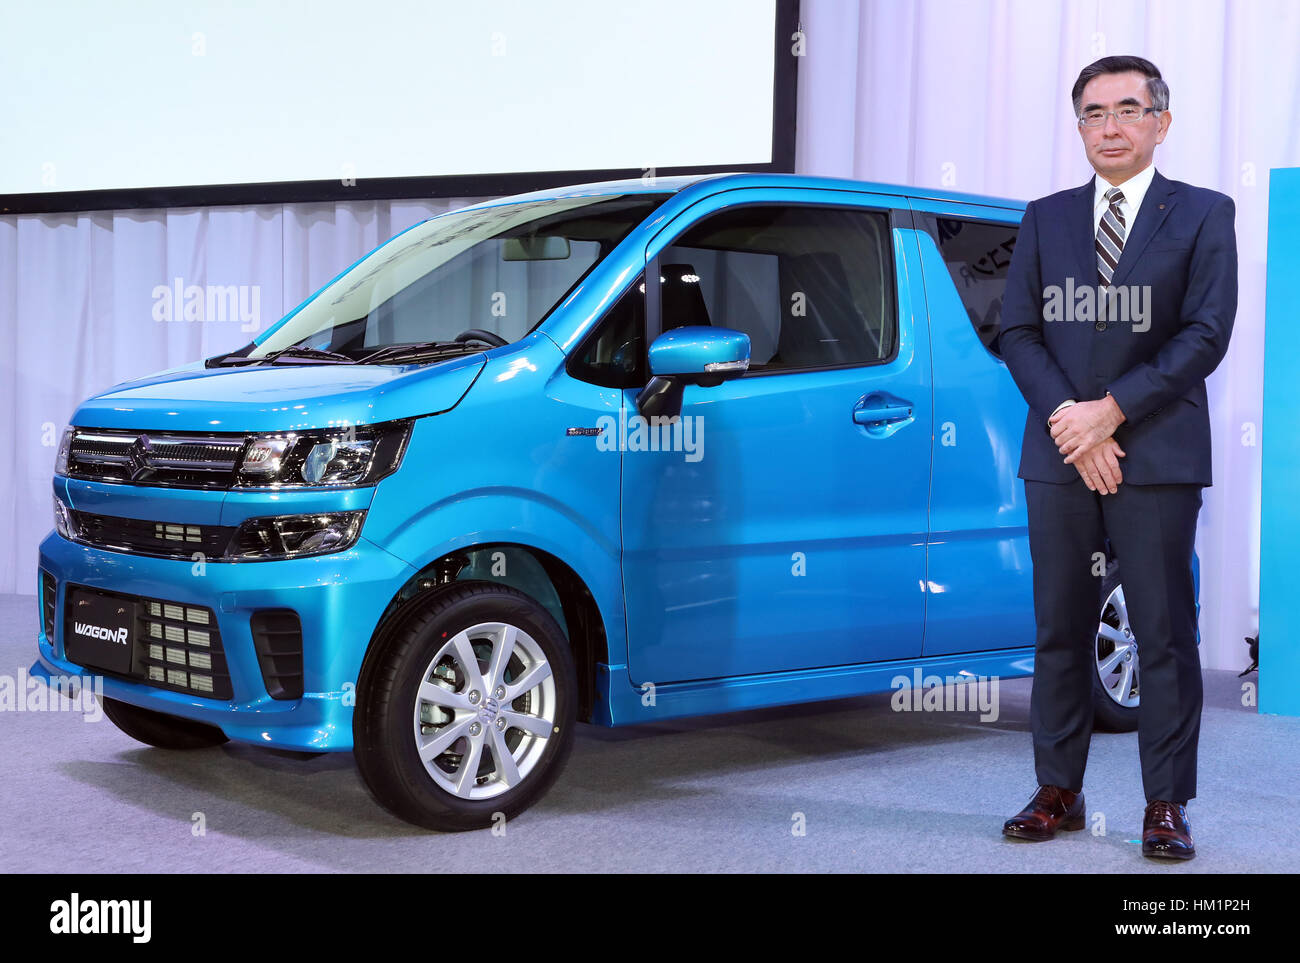 Tokyo, Japan. 1st Feb, 2017. Japan's minicar maker Suzuki Motor president Toshihiro Suzuki displays the mini wagon 'Wagon R' which has 660cc engine or engine/electric-motor hybrid system to drive roomy body in Tokyo on February 1, 2017. The new Wagon R has various safety devices and minicar's first head-up display. Credit: Yoshio Tsunoda/AFLO/Alamy Live News Stock Photo